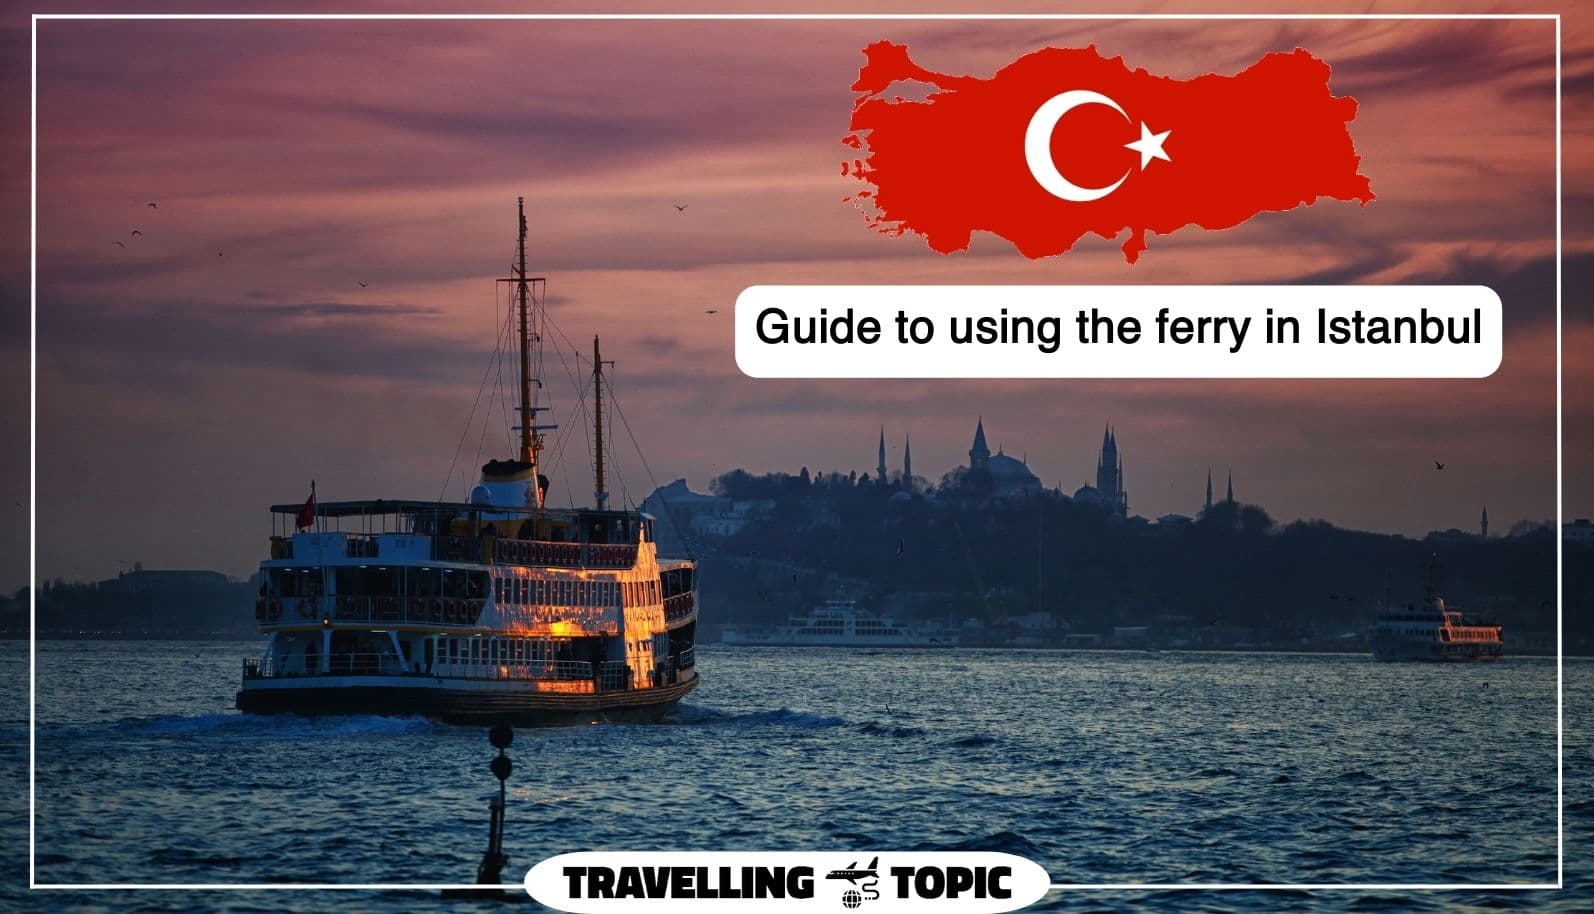 Guide to using the ferry in Istanbul